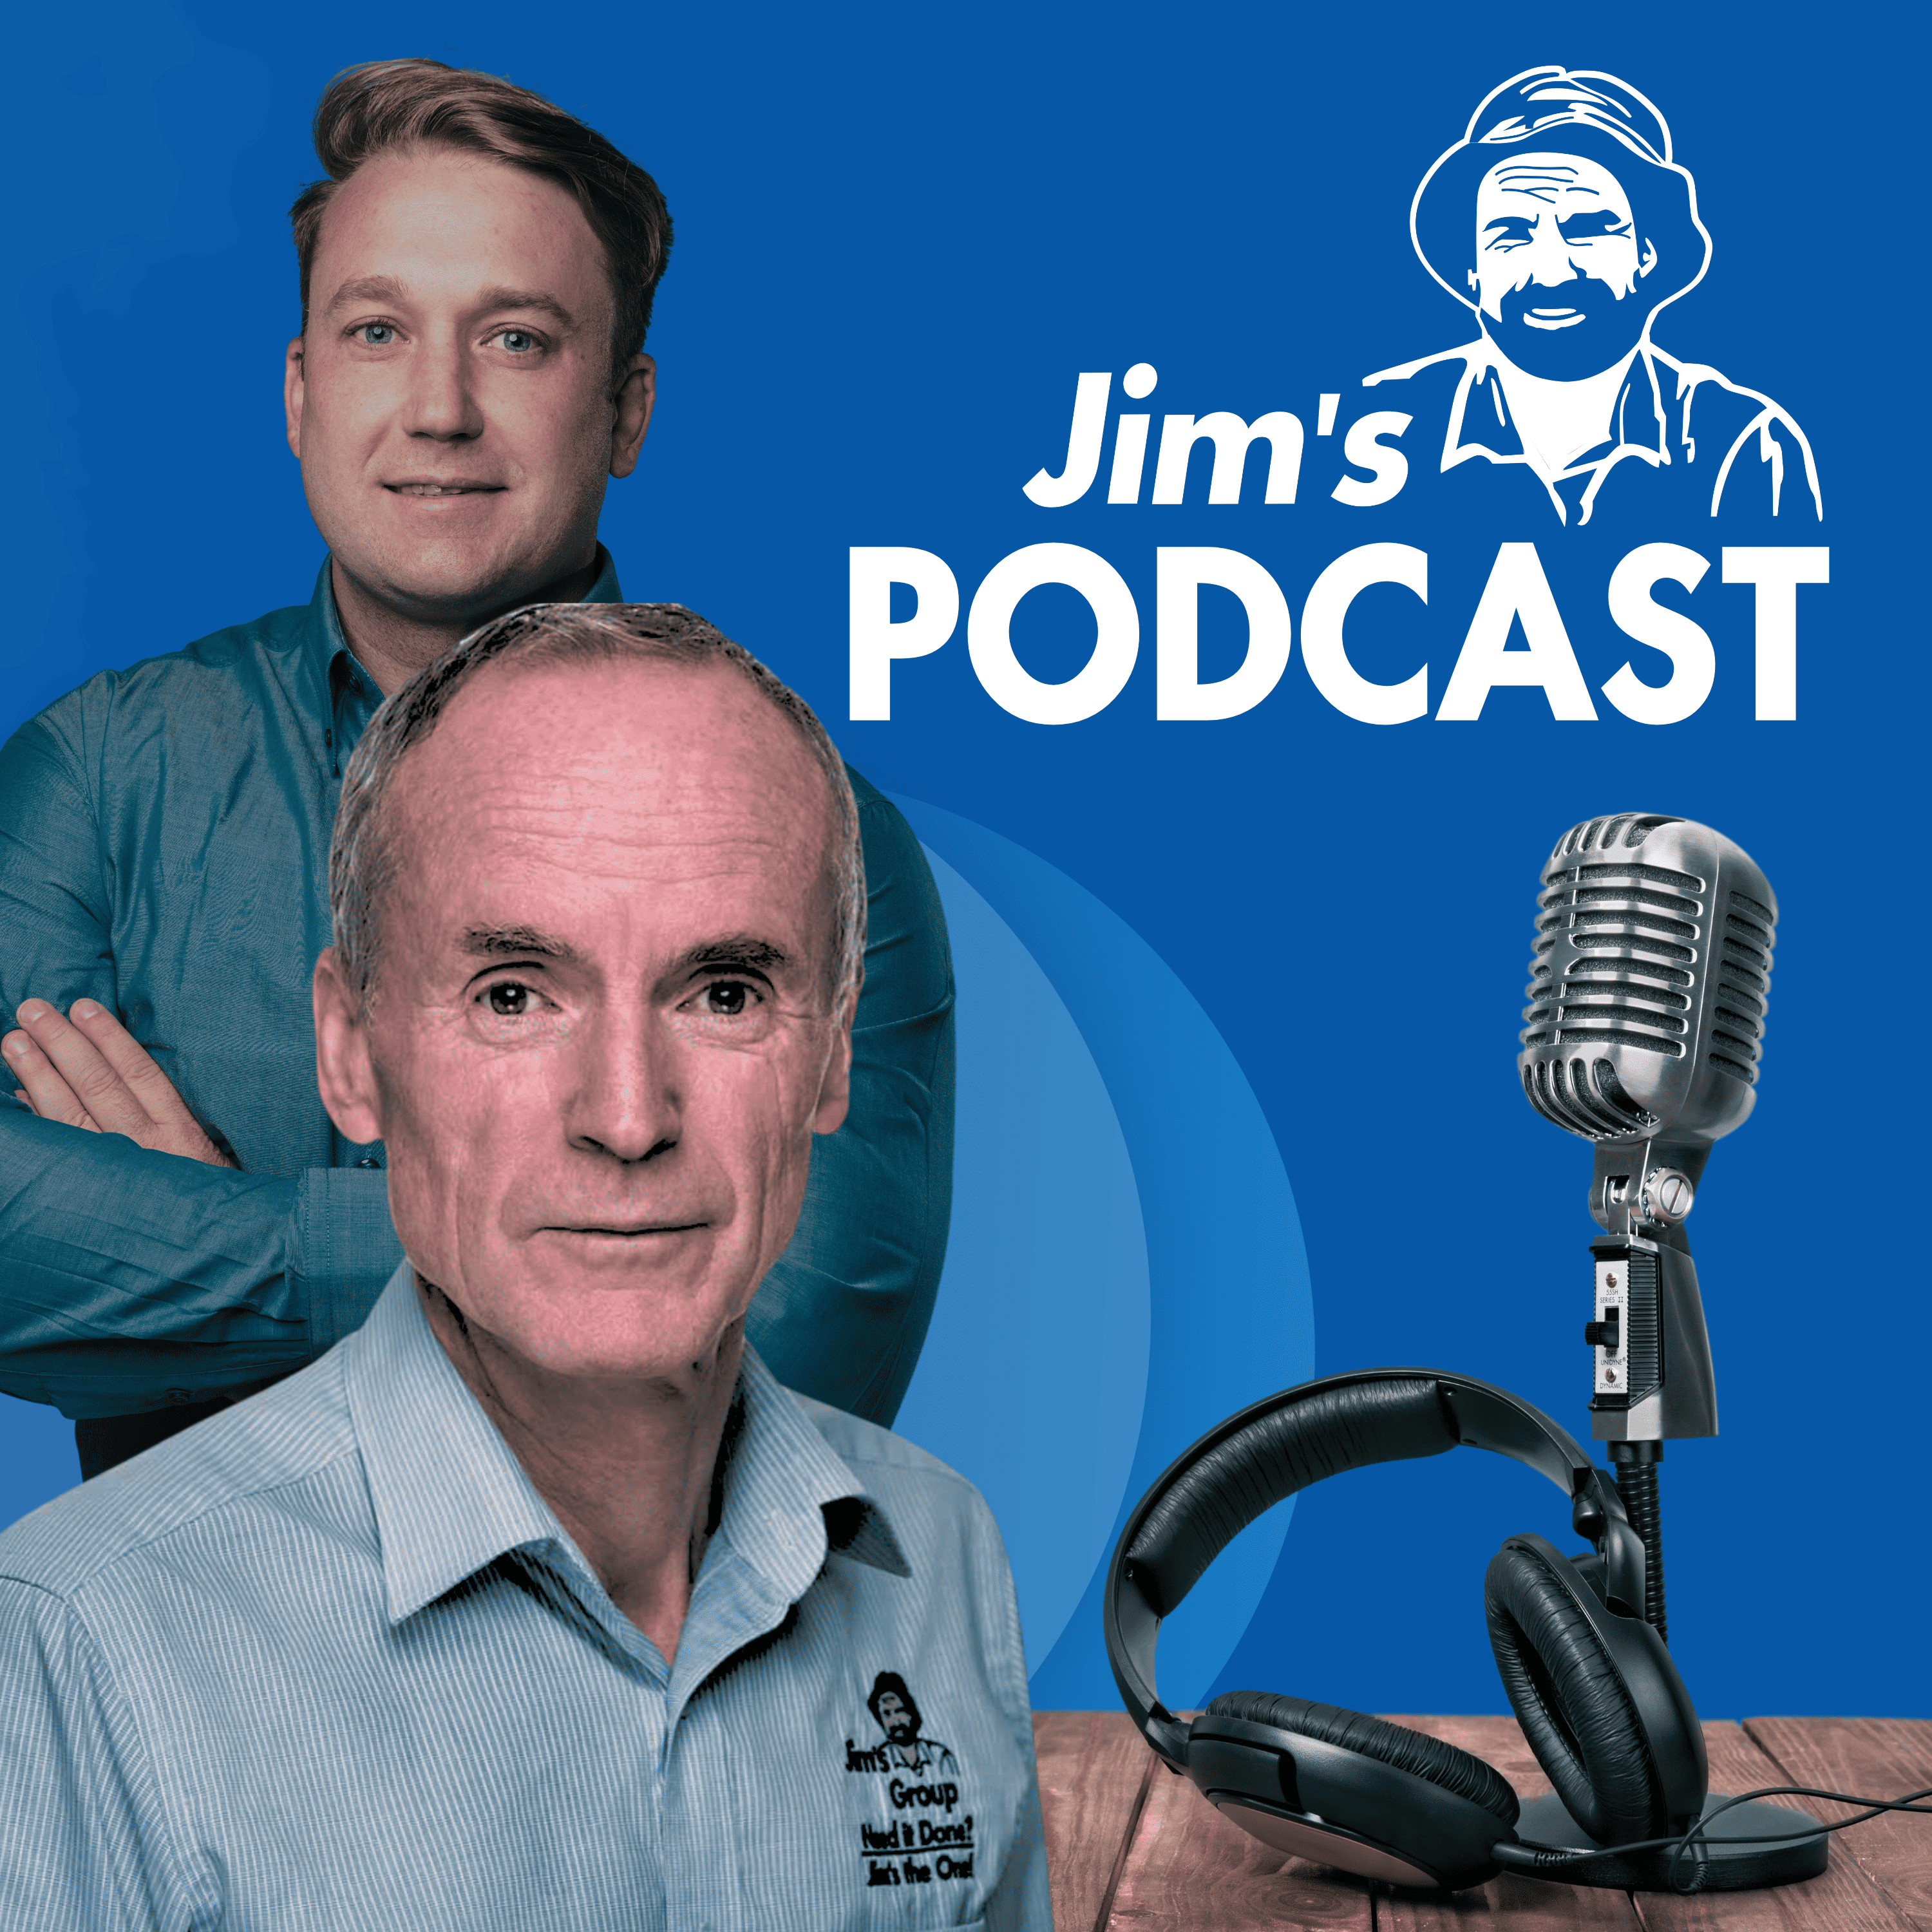 Jim's Podcast with Jim Penman and Joel Kleber